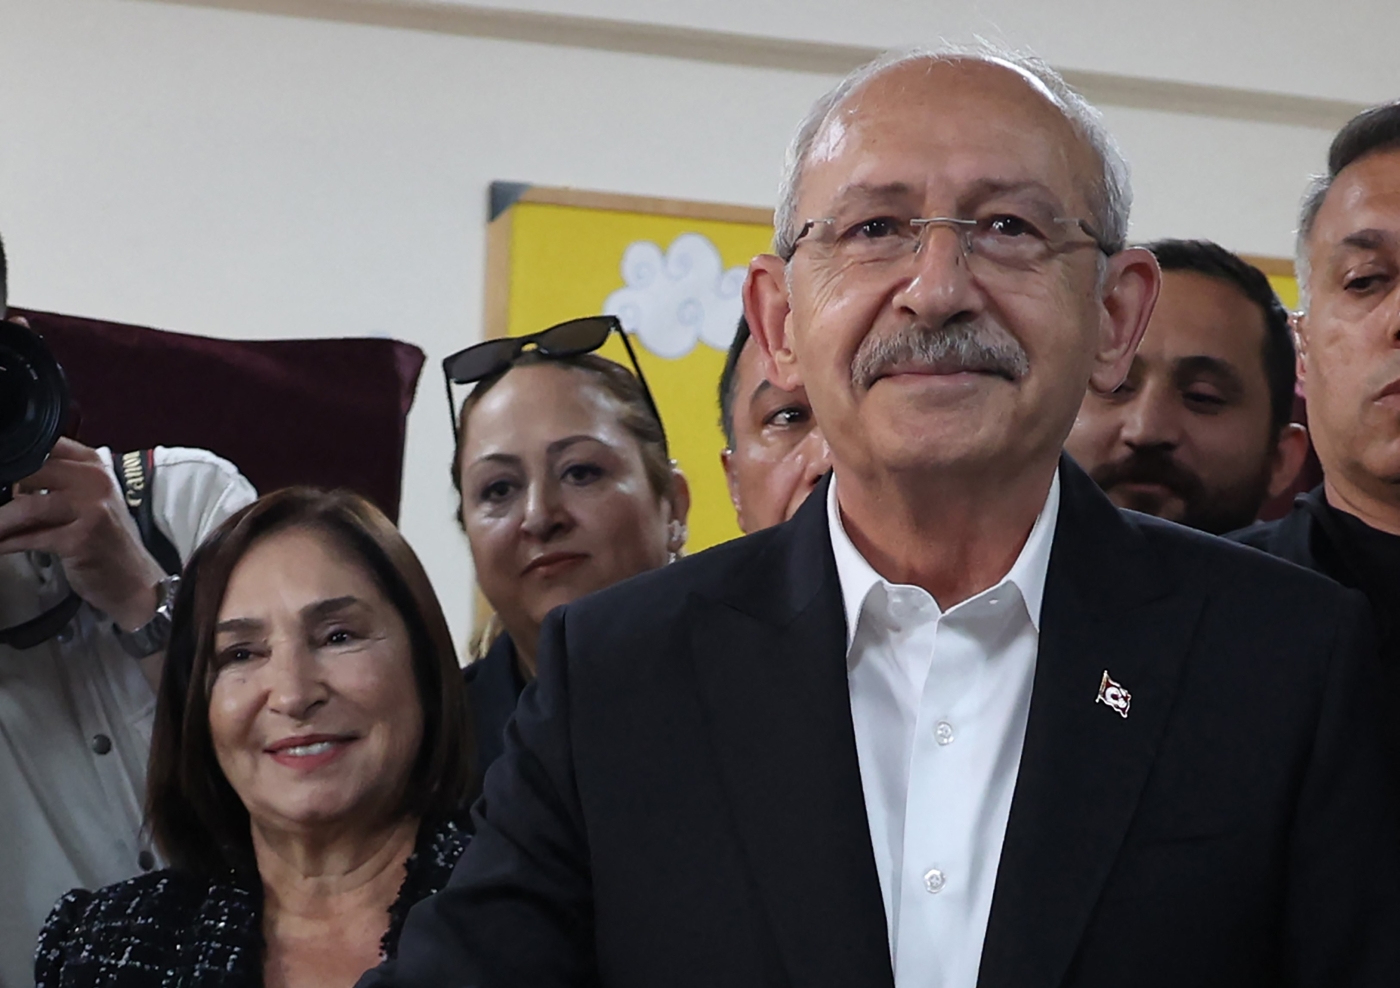 Kemal Kilicdaroglu (R) the 74-year-old leader of the Republican People's Party, or CHP, casts his vote next to his wife Selvi Kilicdaroglu (2L) at a polling station in Ankara on May 14, 2023 (AFP)